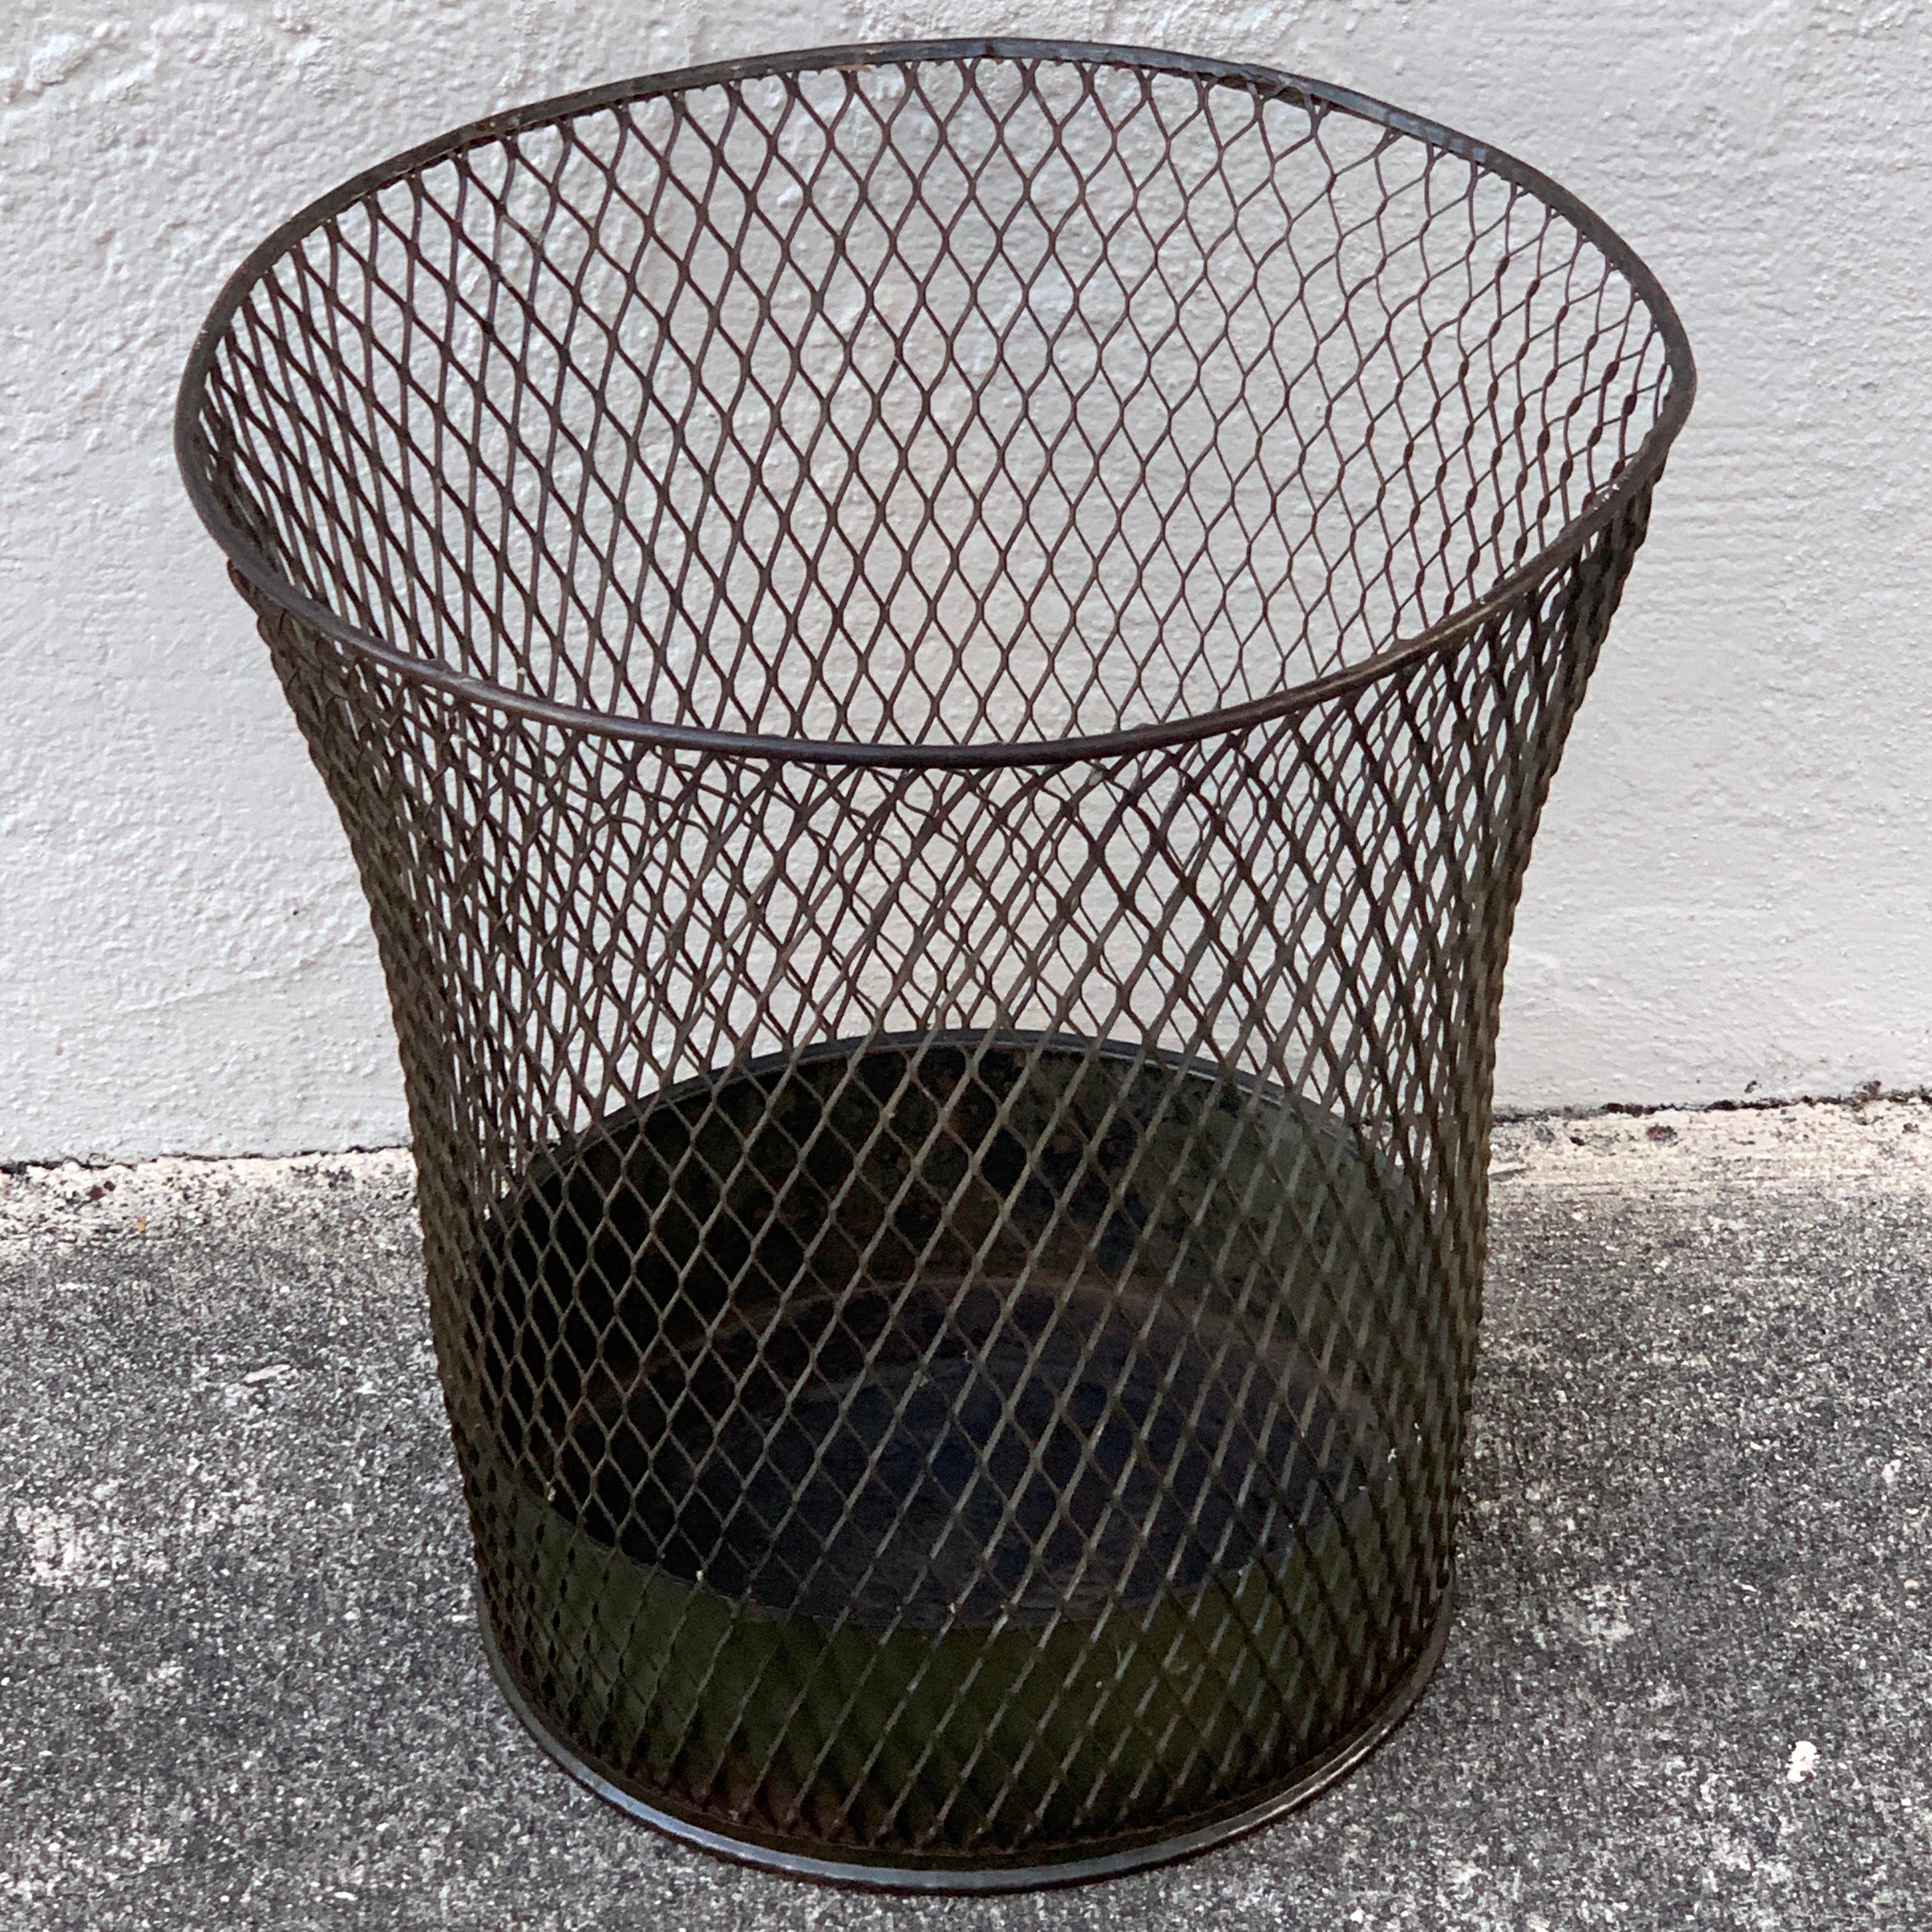 Vintage industrial wire mesh waste paper basket, great shape and form, some minor bends of the frame, presents well, stamped with maker Nemco Industries. Standing 14